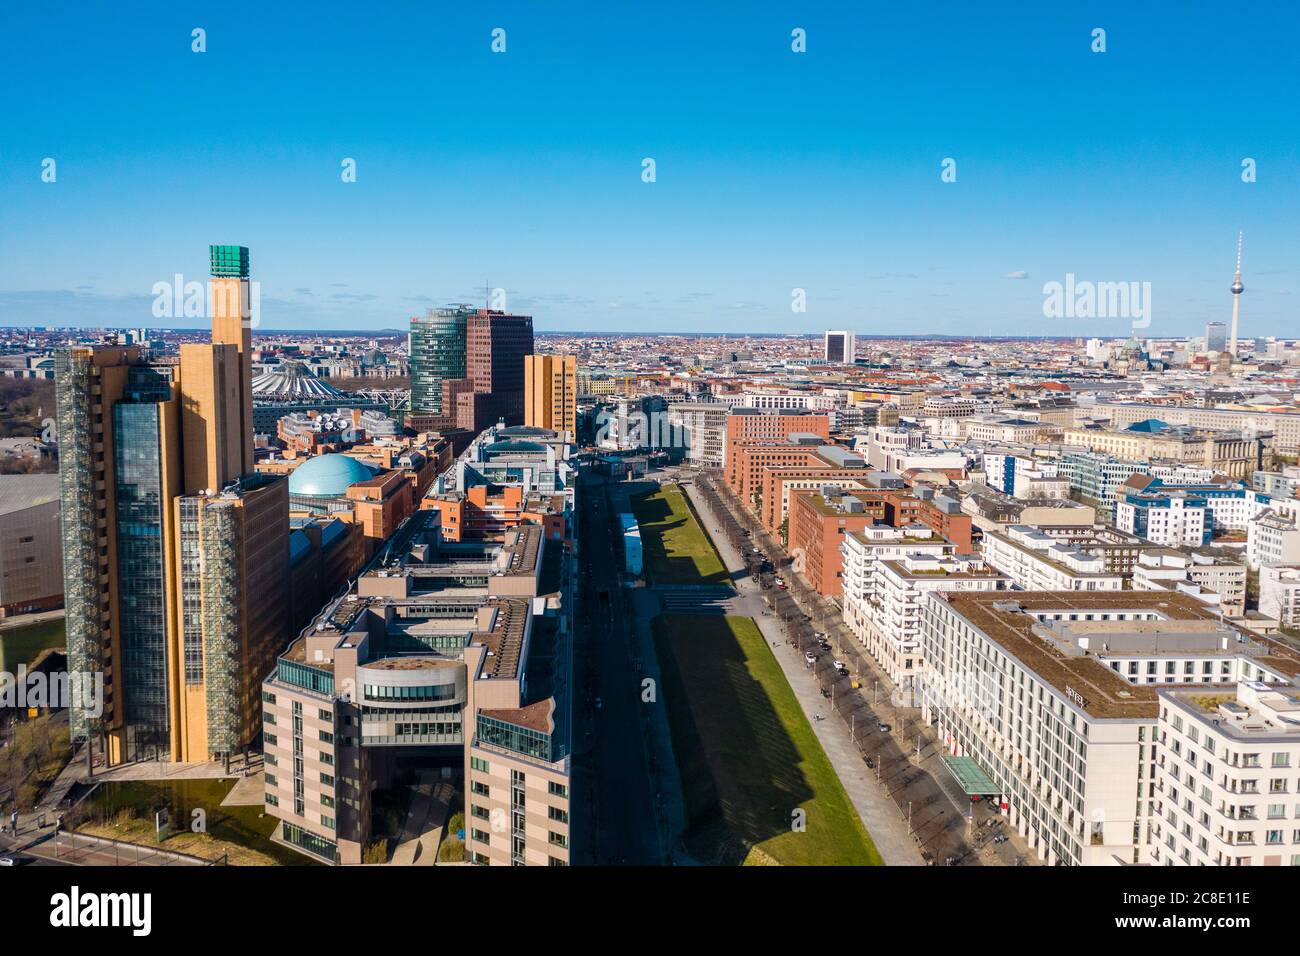 Germany, Berlin, Aerial view of Mitte district Stock Photo